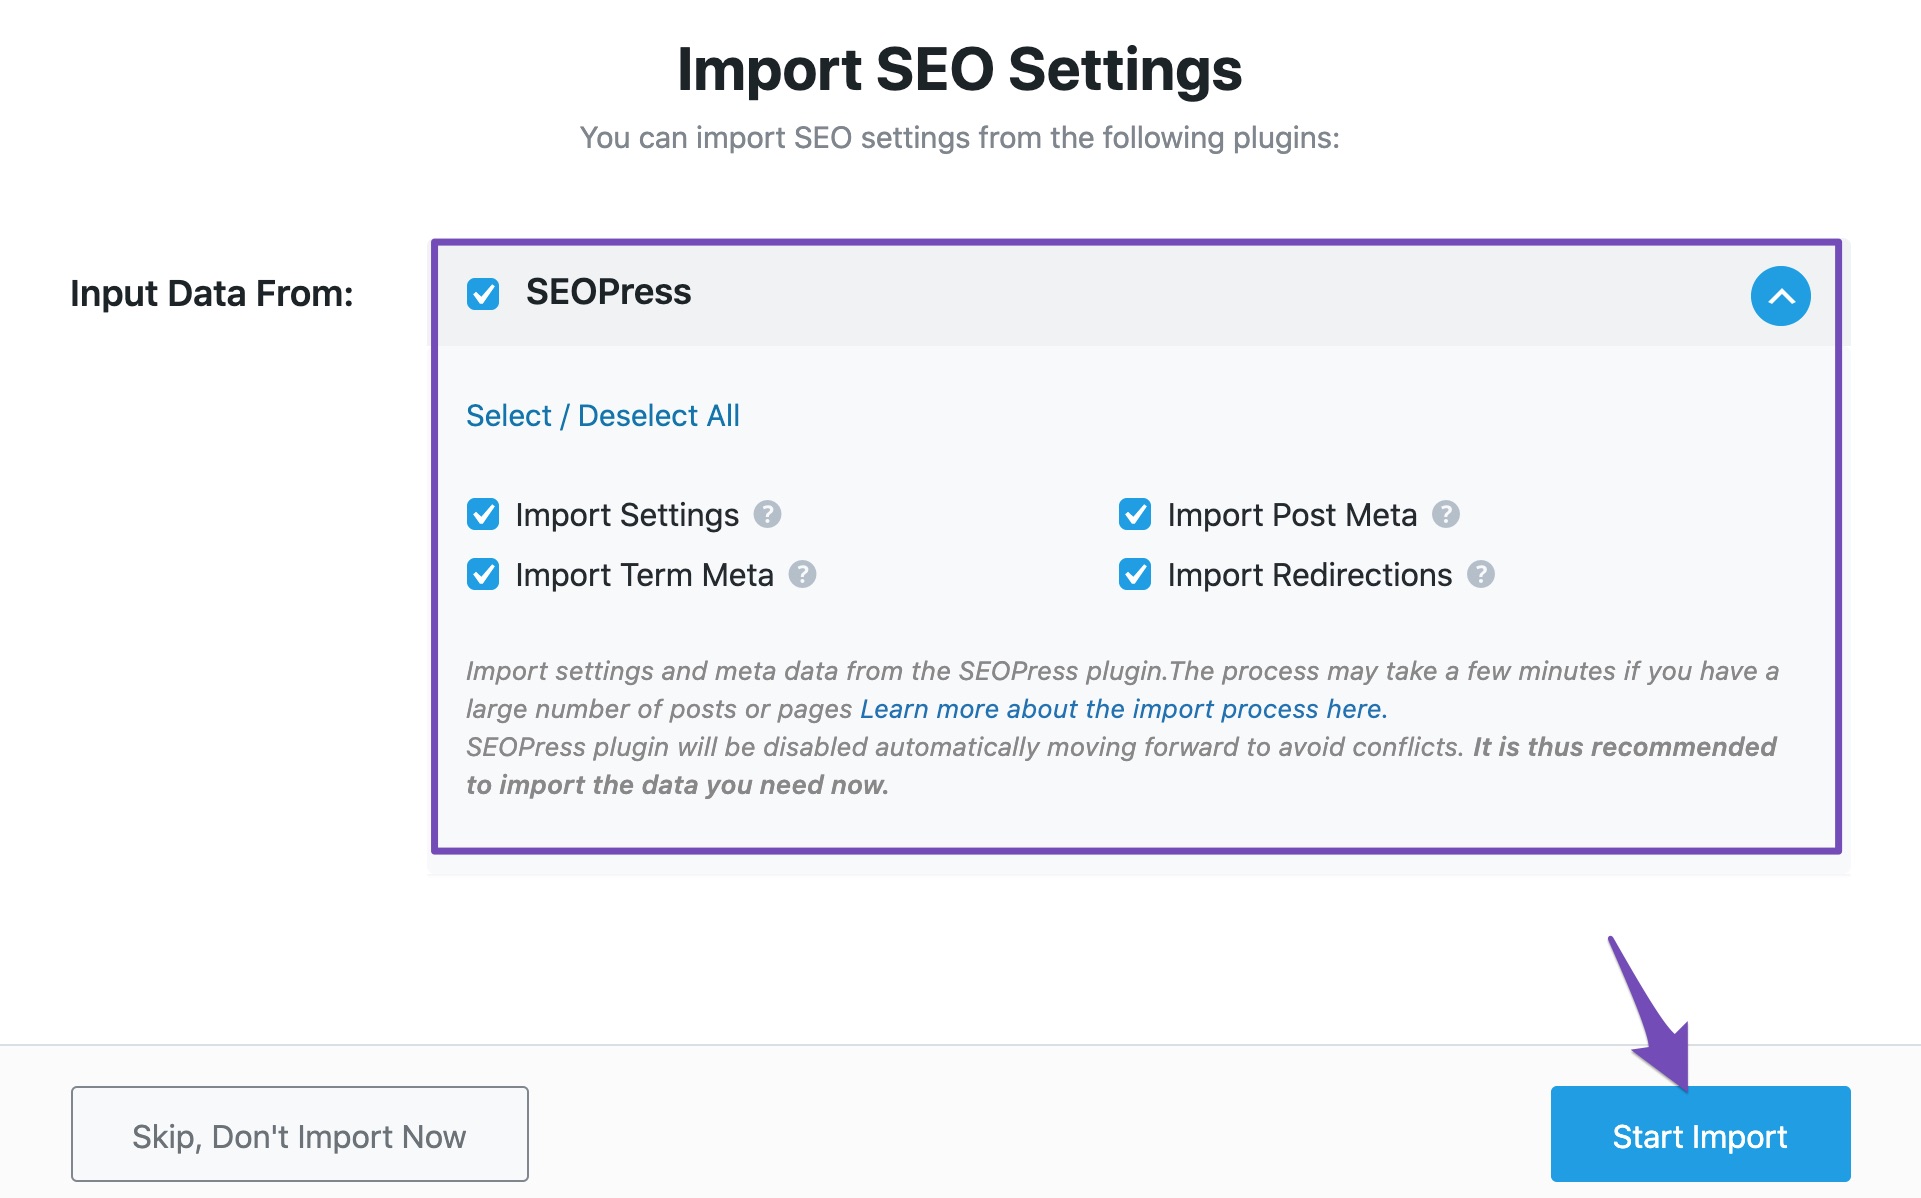 Input available from SEOPress to import